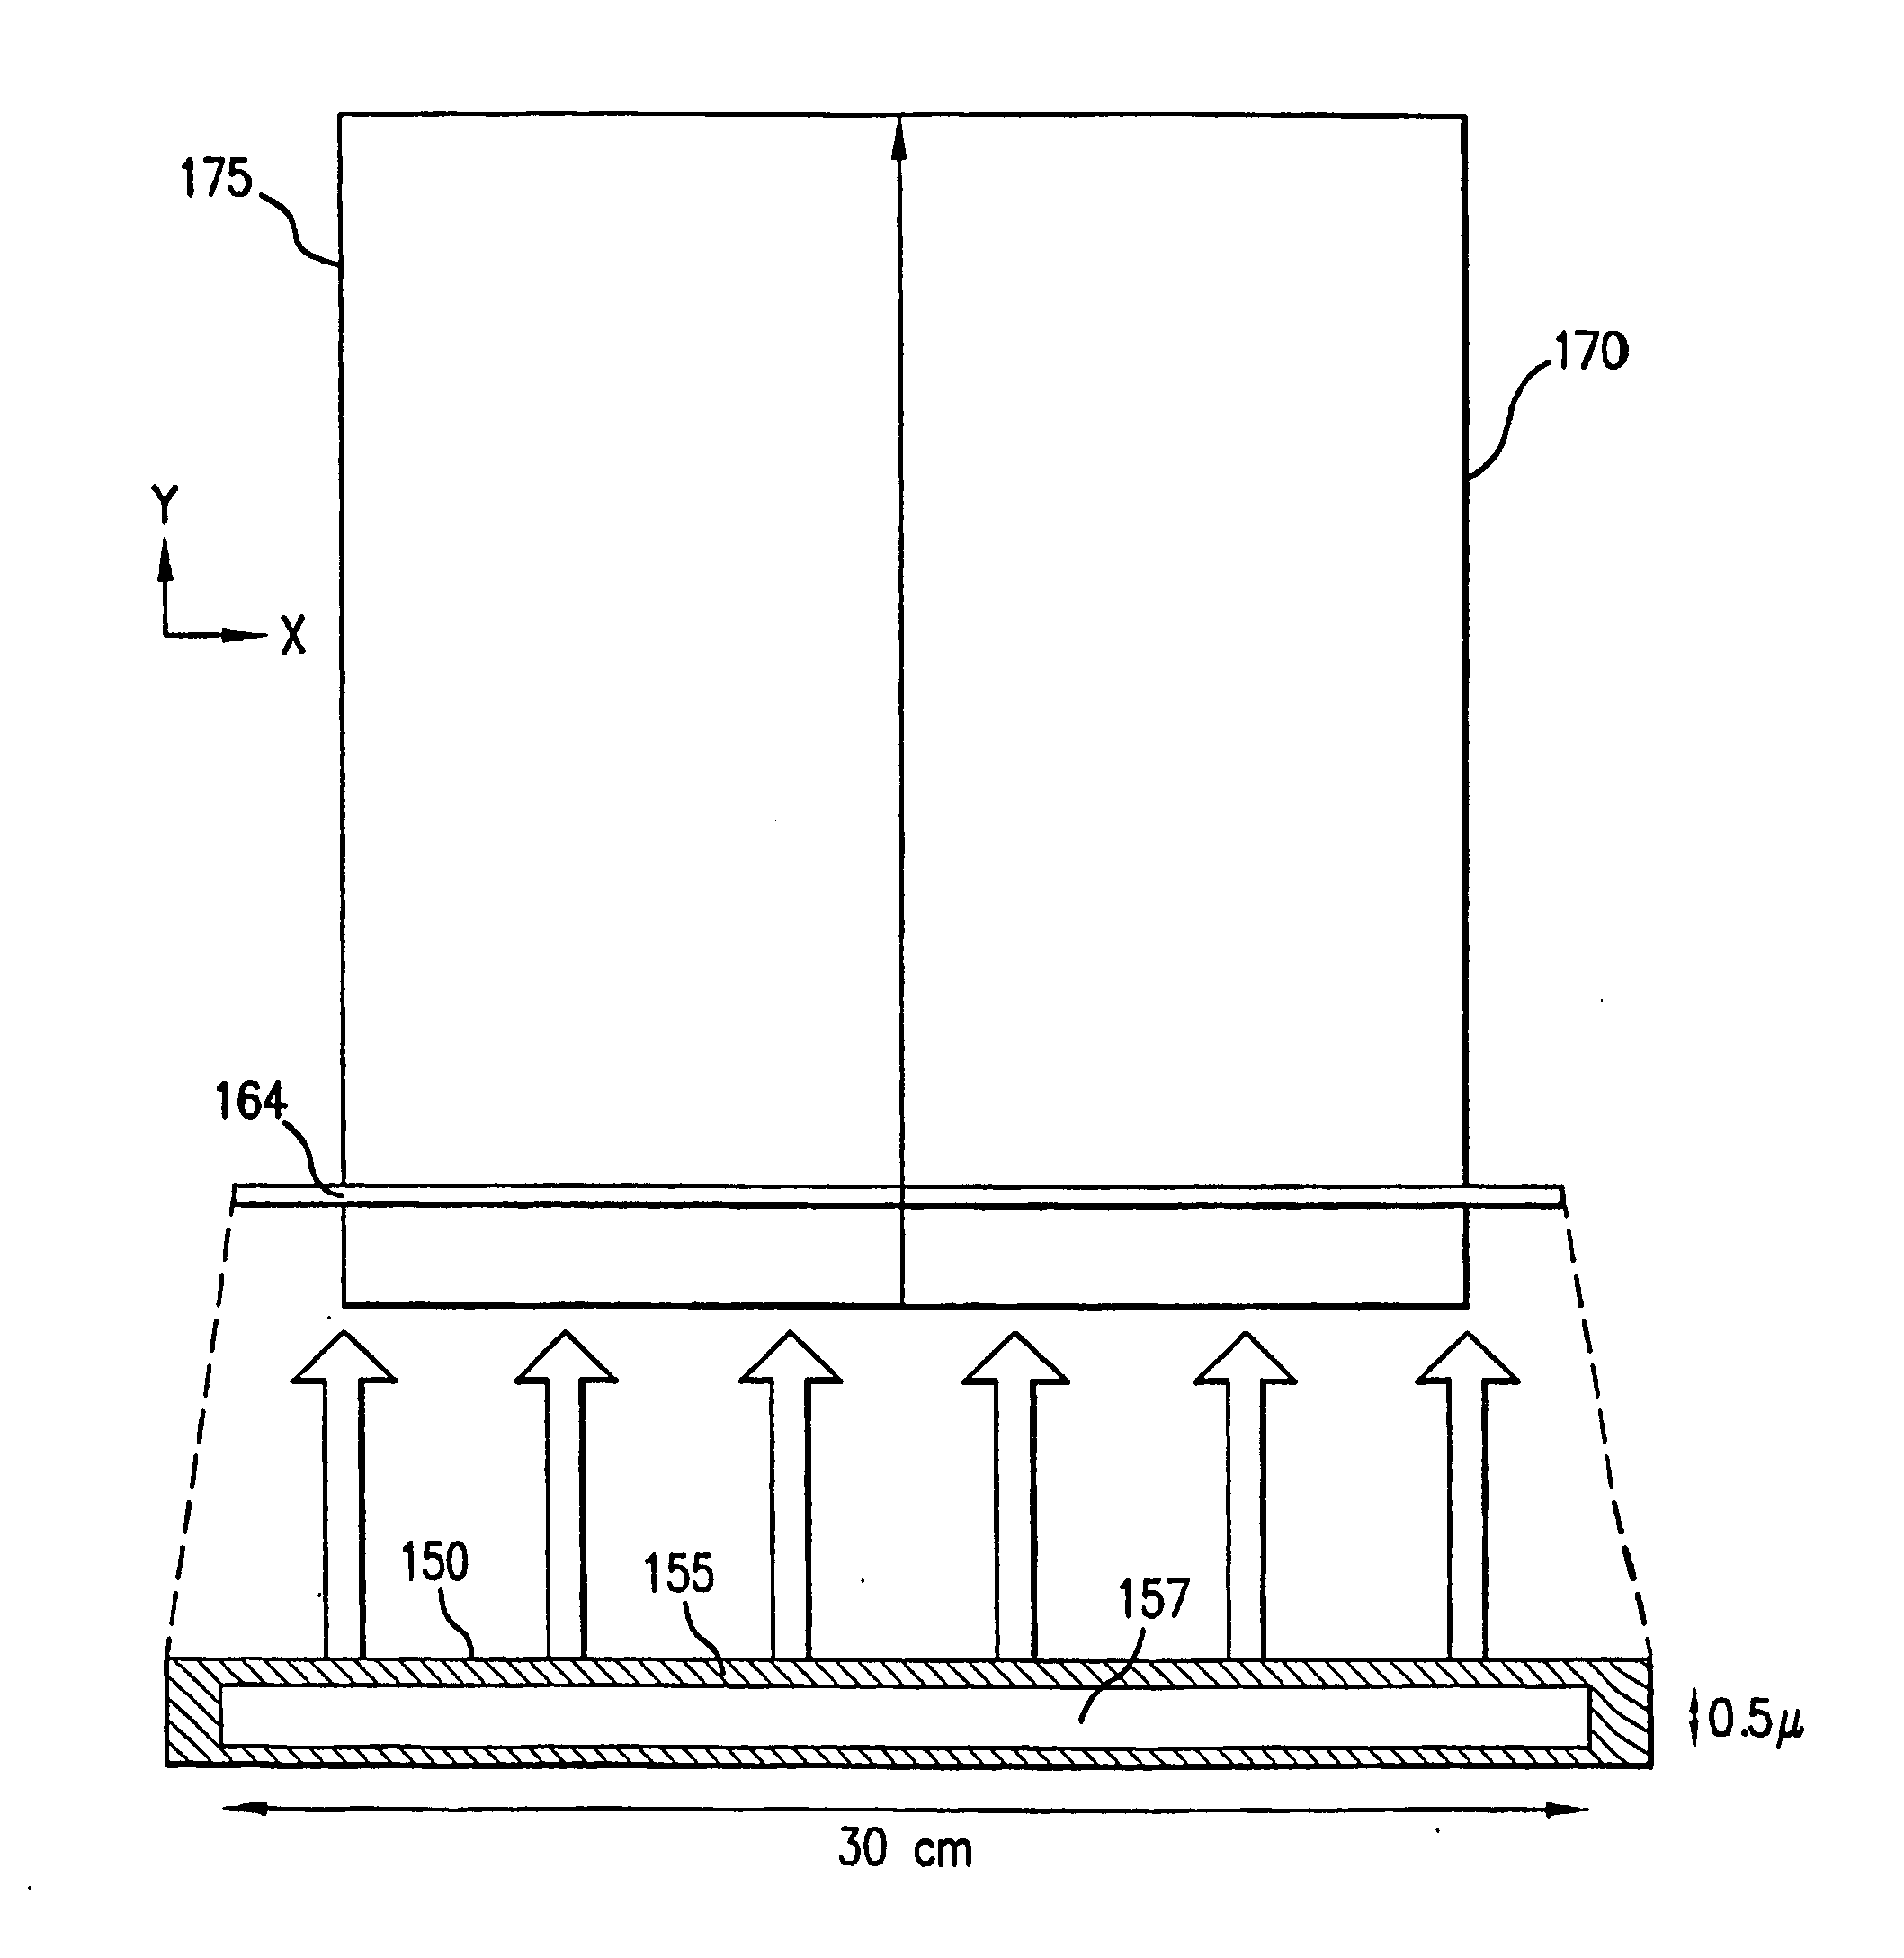 Processes and systems for laser crystallization processing of film regions on a substrate utilizing a line-type beam, and structures of such film regions